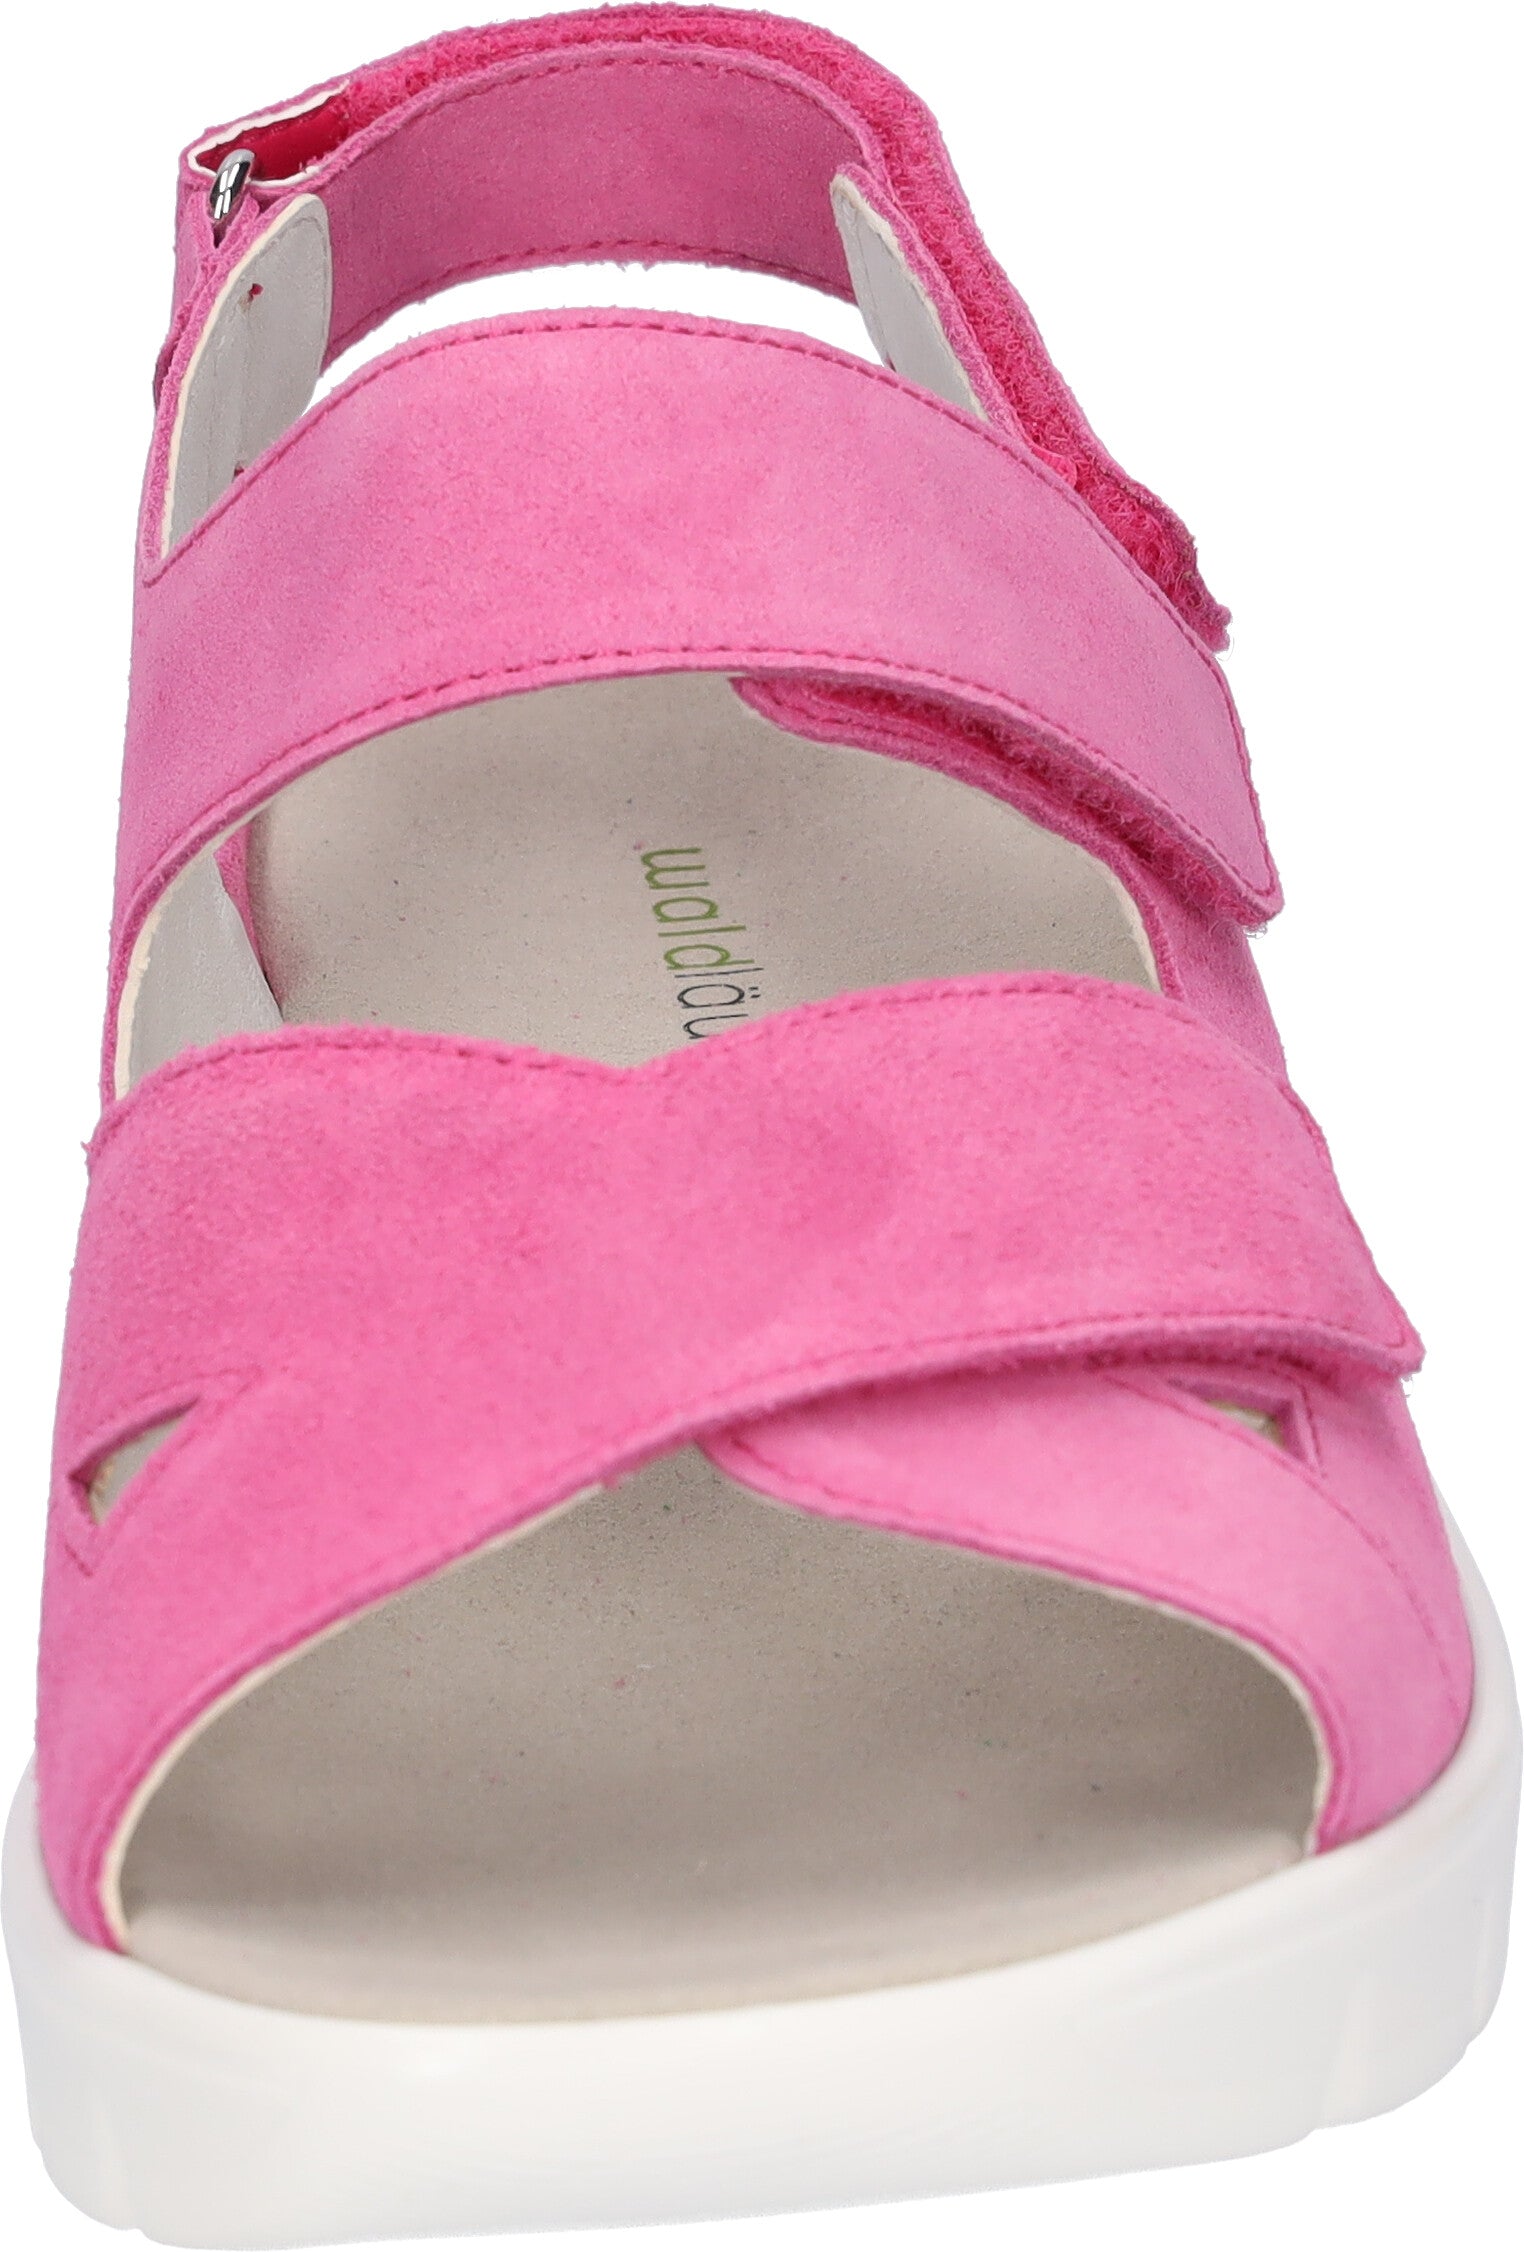 Waldlaufer 658001 195 233 K-Adea Ladies Orchid Pink Suede Arch Support Touch Fastening Sandals